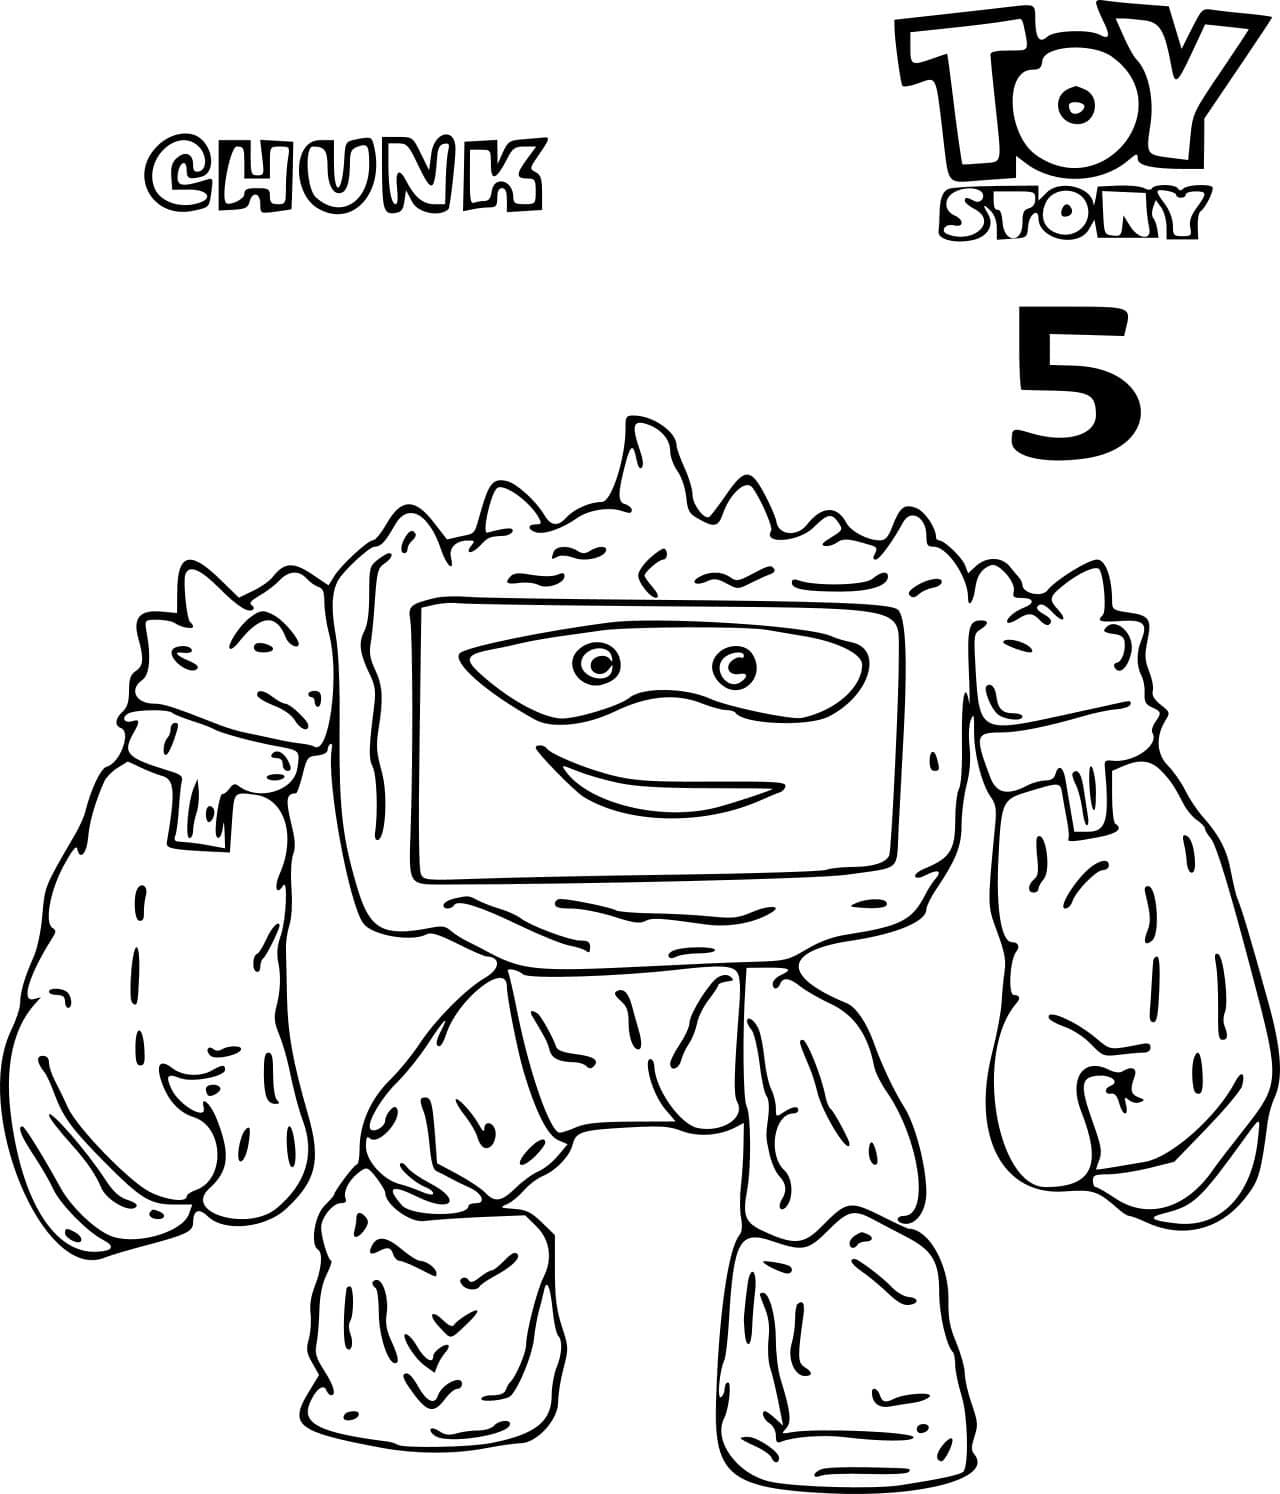 chunk-Toy-Story-5 coloring pages